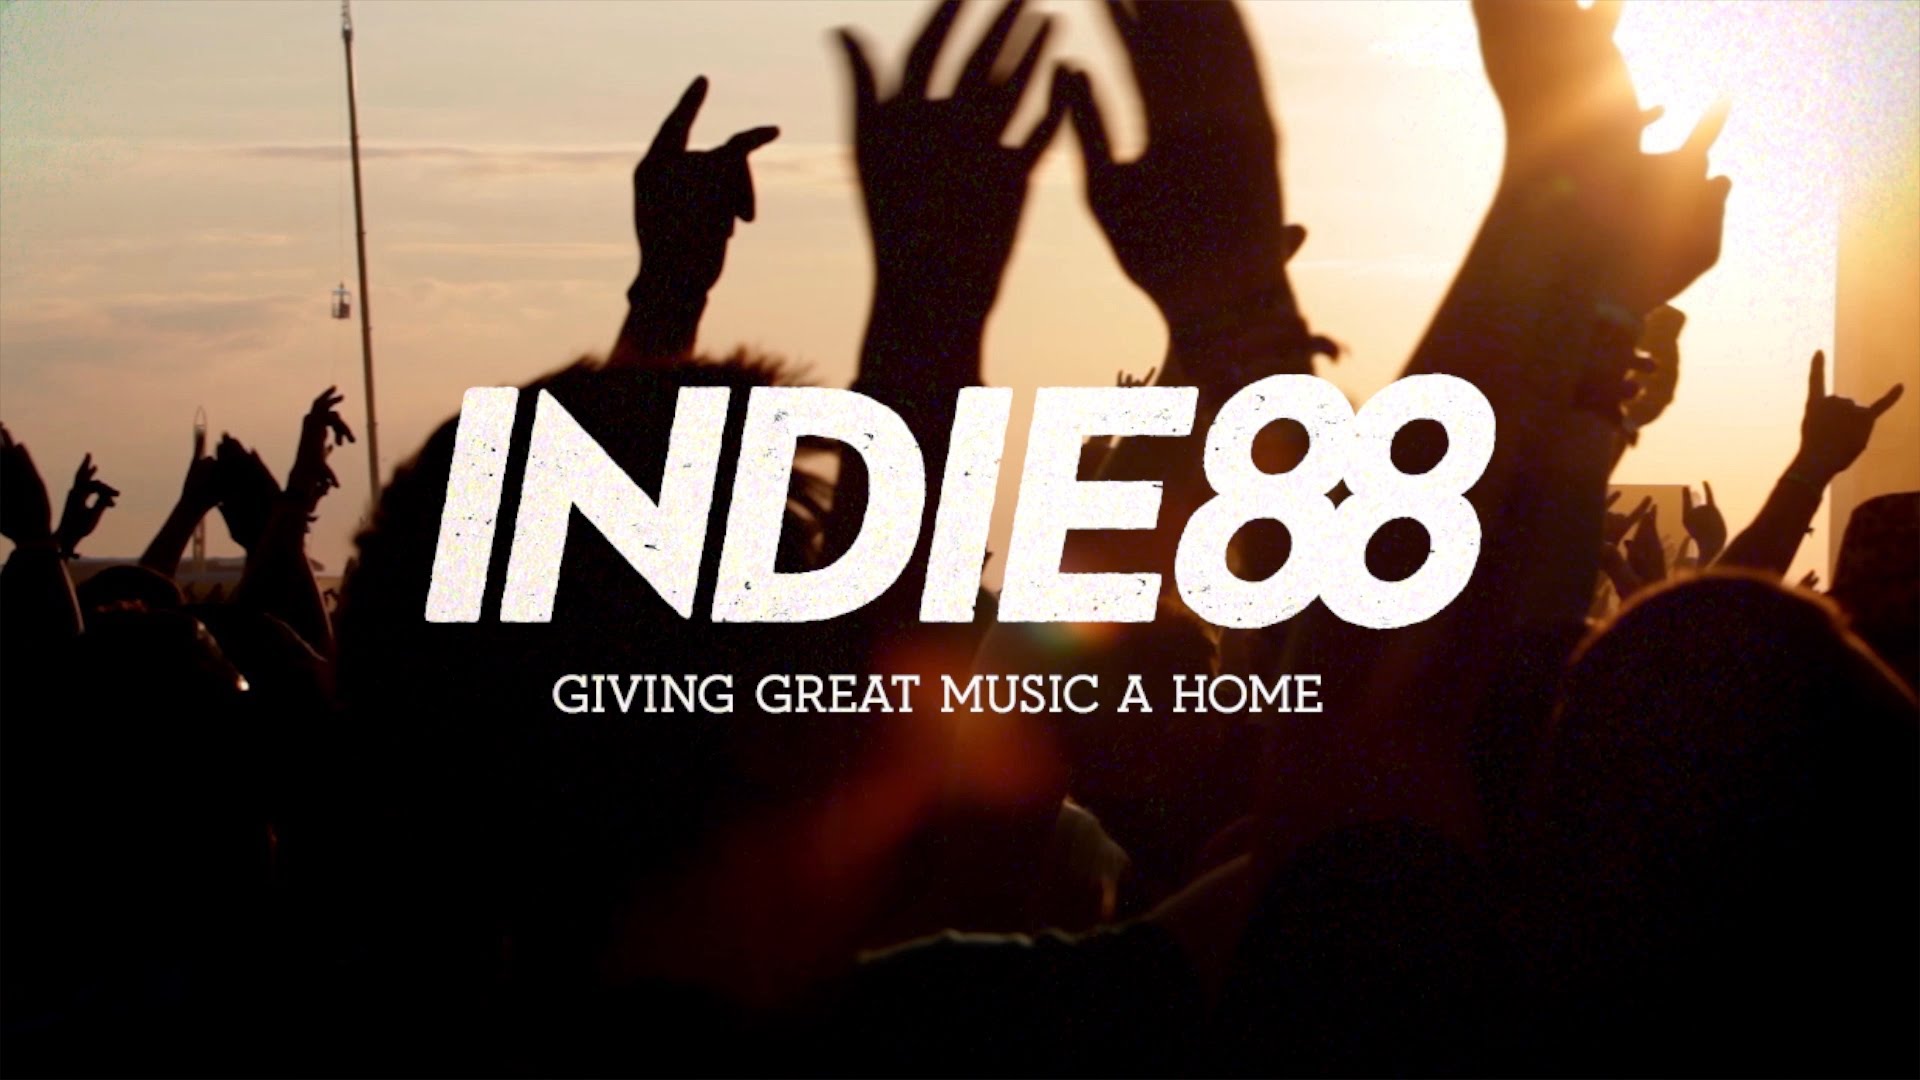 indie 88 - giving music a home